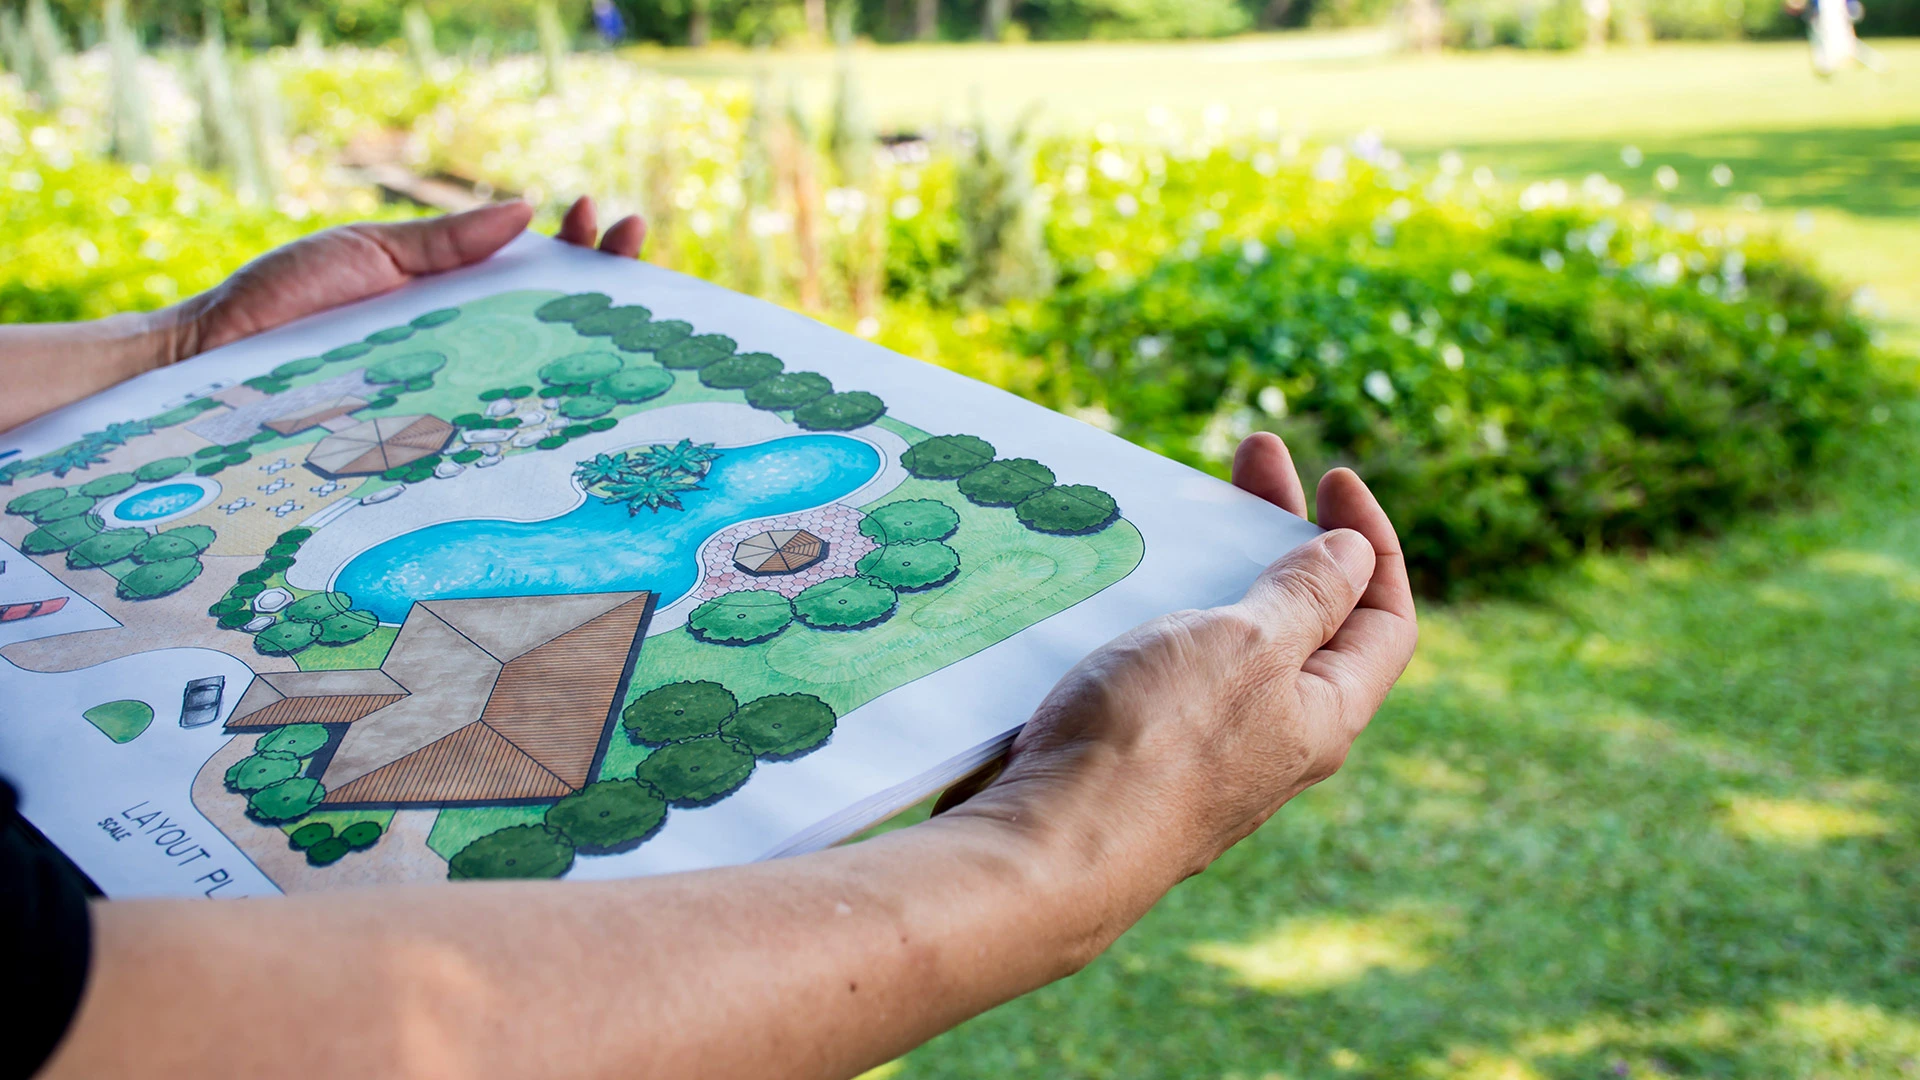 Our landscape designer holding a custom drawing for a future landscape in Gibsonville, NC.